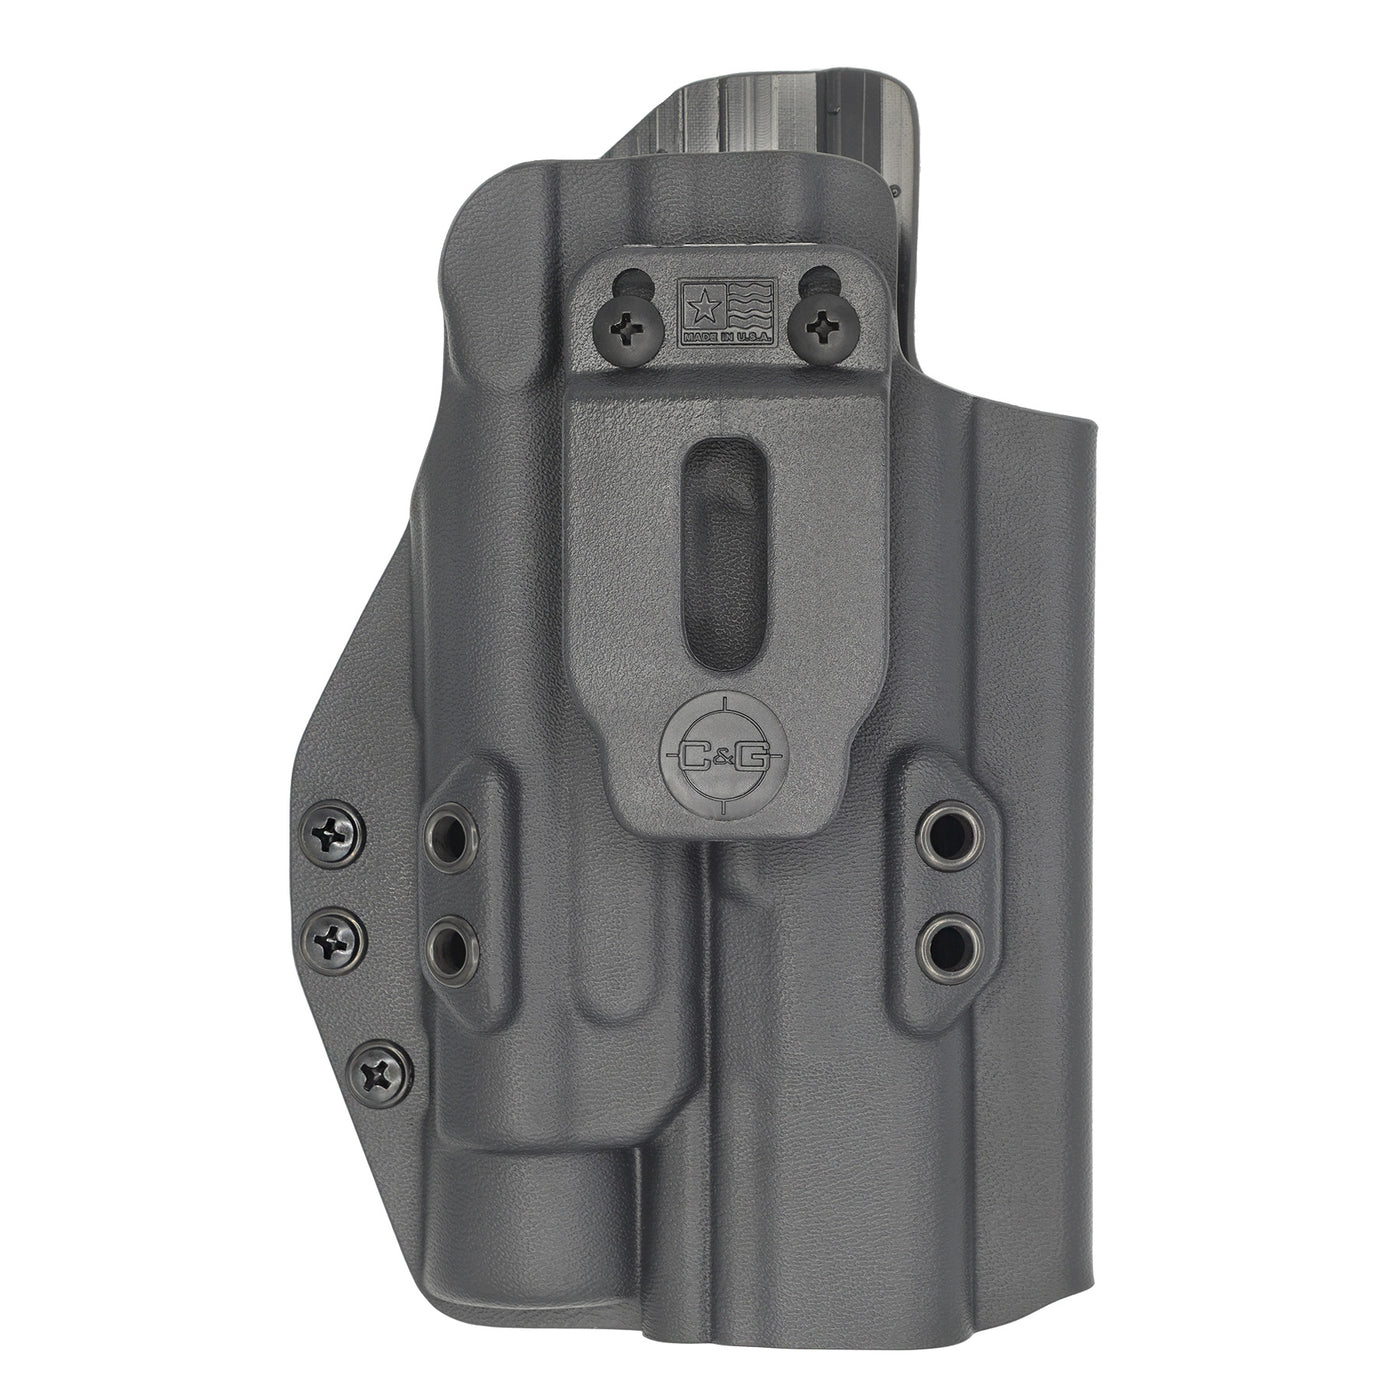 C&G Holsters Quickship IWB Tactical S&W M&P 10/45 Streamlight TLR-1